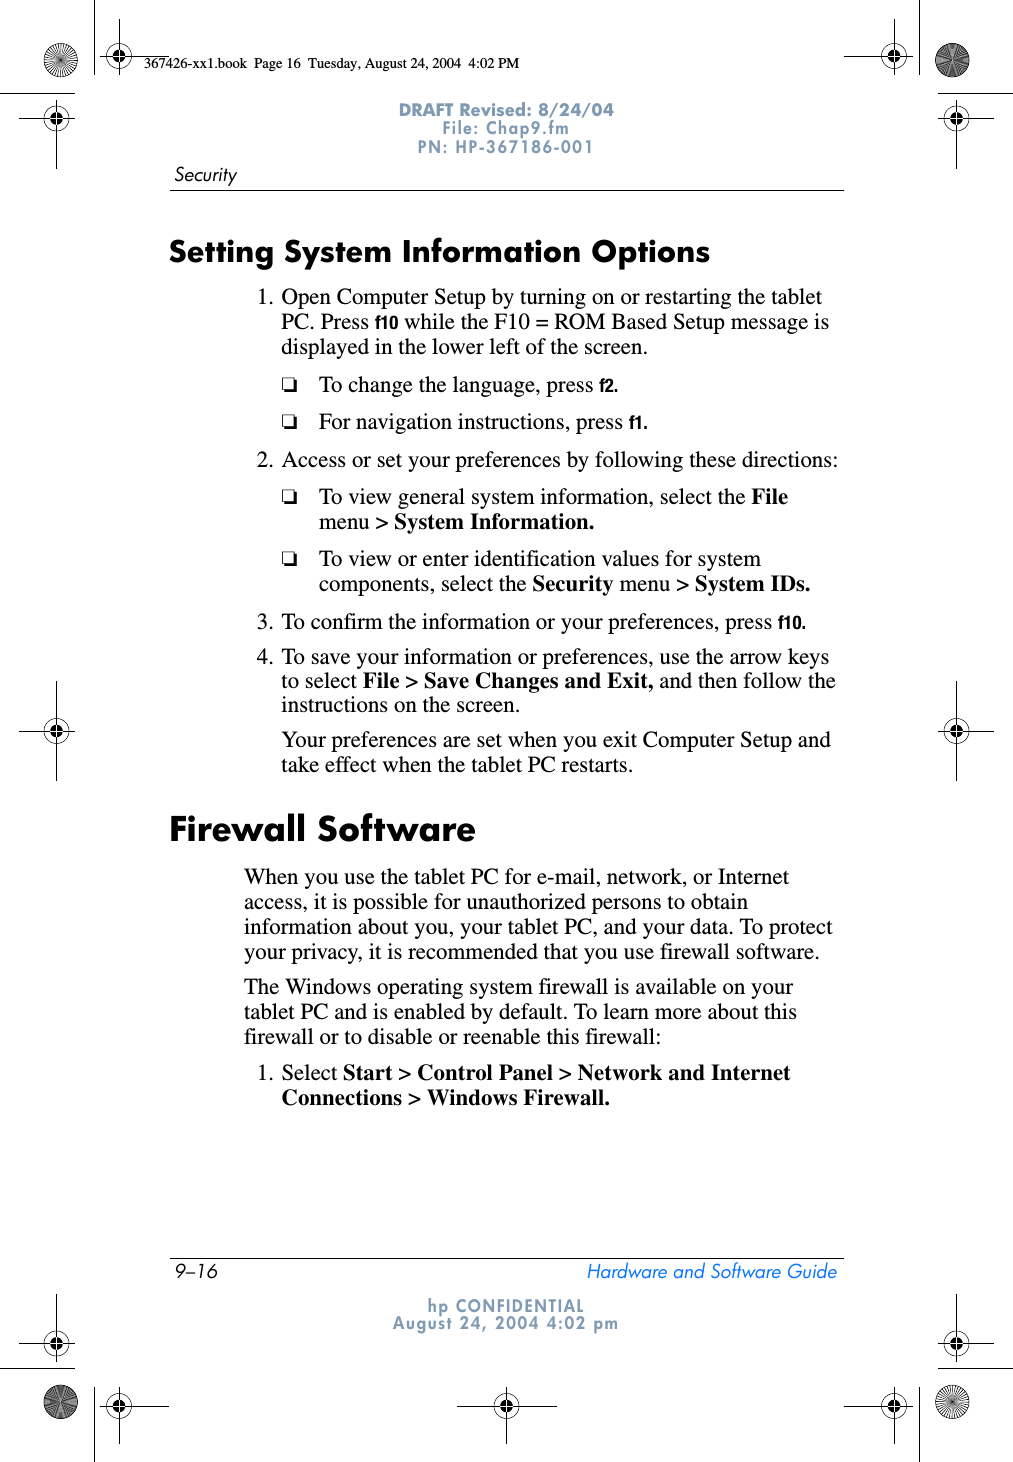 9–16 Hardware and Software GuideSecurityDRAFT Revised: 8/24/04File: Chap9.fm PN: HP-367186-001 hp CONFIDENTIALAugust 24, 2004 4:02 pmSetting System Information Options1. Open Computer Setup by turning on or restarting the tablet PC. Press f10 while the F10 = ROM Based Setup message is displayed in the lower left of the screen.❏To change the language, press f2.❏For navigation instructions, press f1.2. Access or set your preferences by following these directions:❏To view general system information, select the File menu &gt; System Information.❏To view or enter identification values for system components, select the Security menu &gt; System IDs.3. To confirm the information or your preferences, press f10.4. To save your information or preferences, use the arrow keys to select File &gt; Save Changes and Exit, and then follow the instructions on the screen.Your preferences are set when you exit Computer Setup and take effect when the tablet PC restarts.Firewall SoftwareWhen you use the tablet PC for e-mail, network, or Internet access, it is possible for unauthorized persons to obtain information about you, your tablet PC, and your data. To protect your privacy, it is recommended that you use firewall software.The Windows operating system firewall is available on your tablet PC and is enabled by default. To learn more about this firewall or to disable or reenable this firewall: 1. Select Start &gt; Control Panel &gt; Network and Internet Connections &gt; Windows Firewall. 367426-xx1.book  Page 16  Tuesday, August 24, 2004  4:02 PM